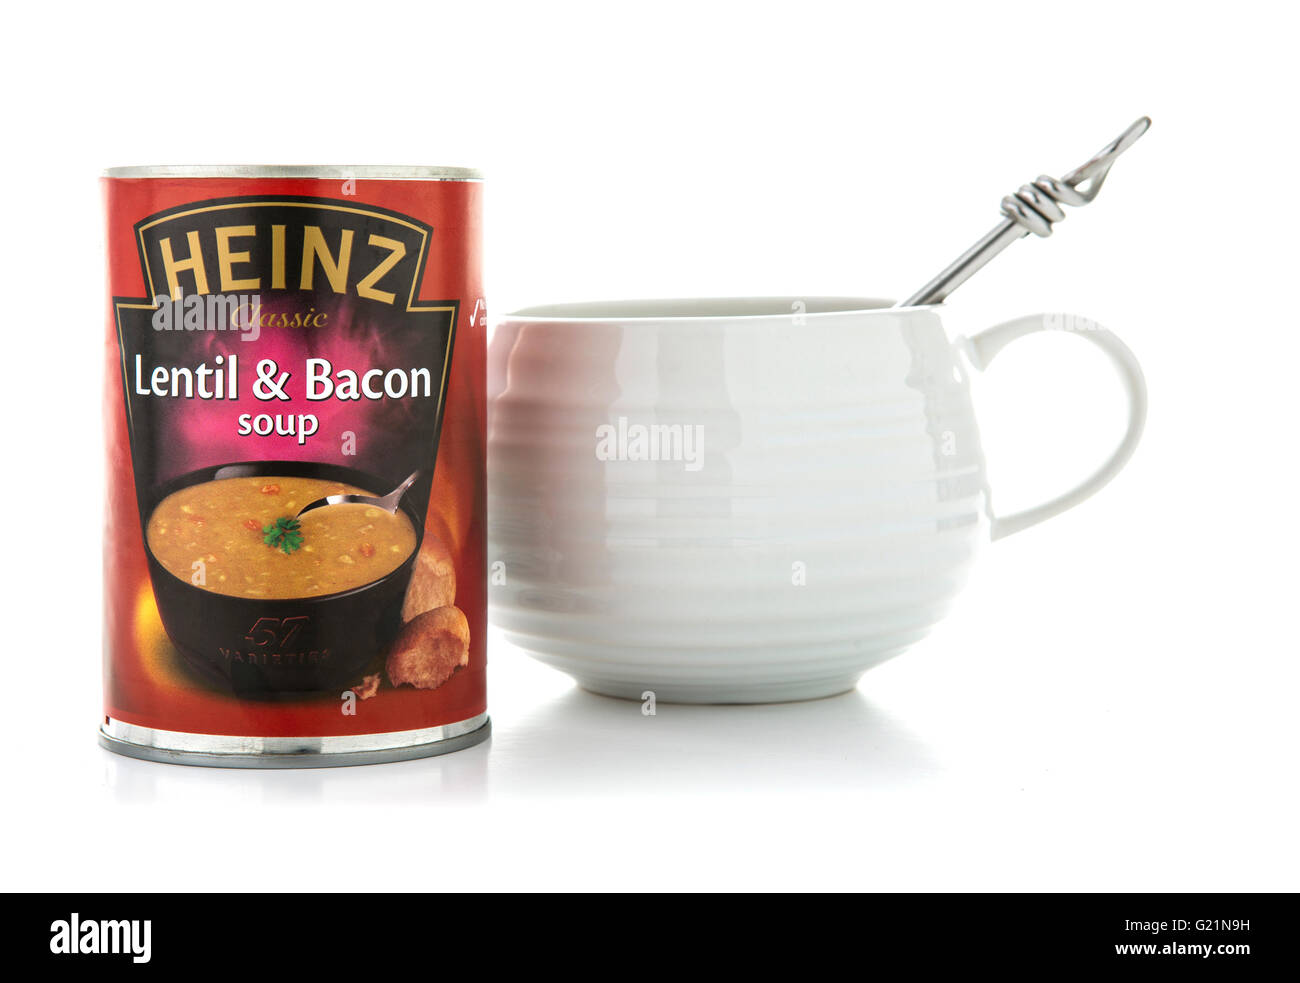 Heinz lentil and Bacon soup with bowl and spoon on a white background Stock Photo